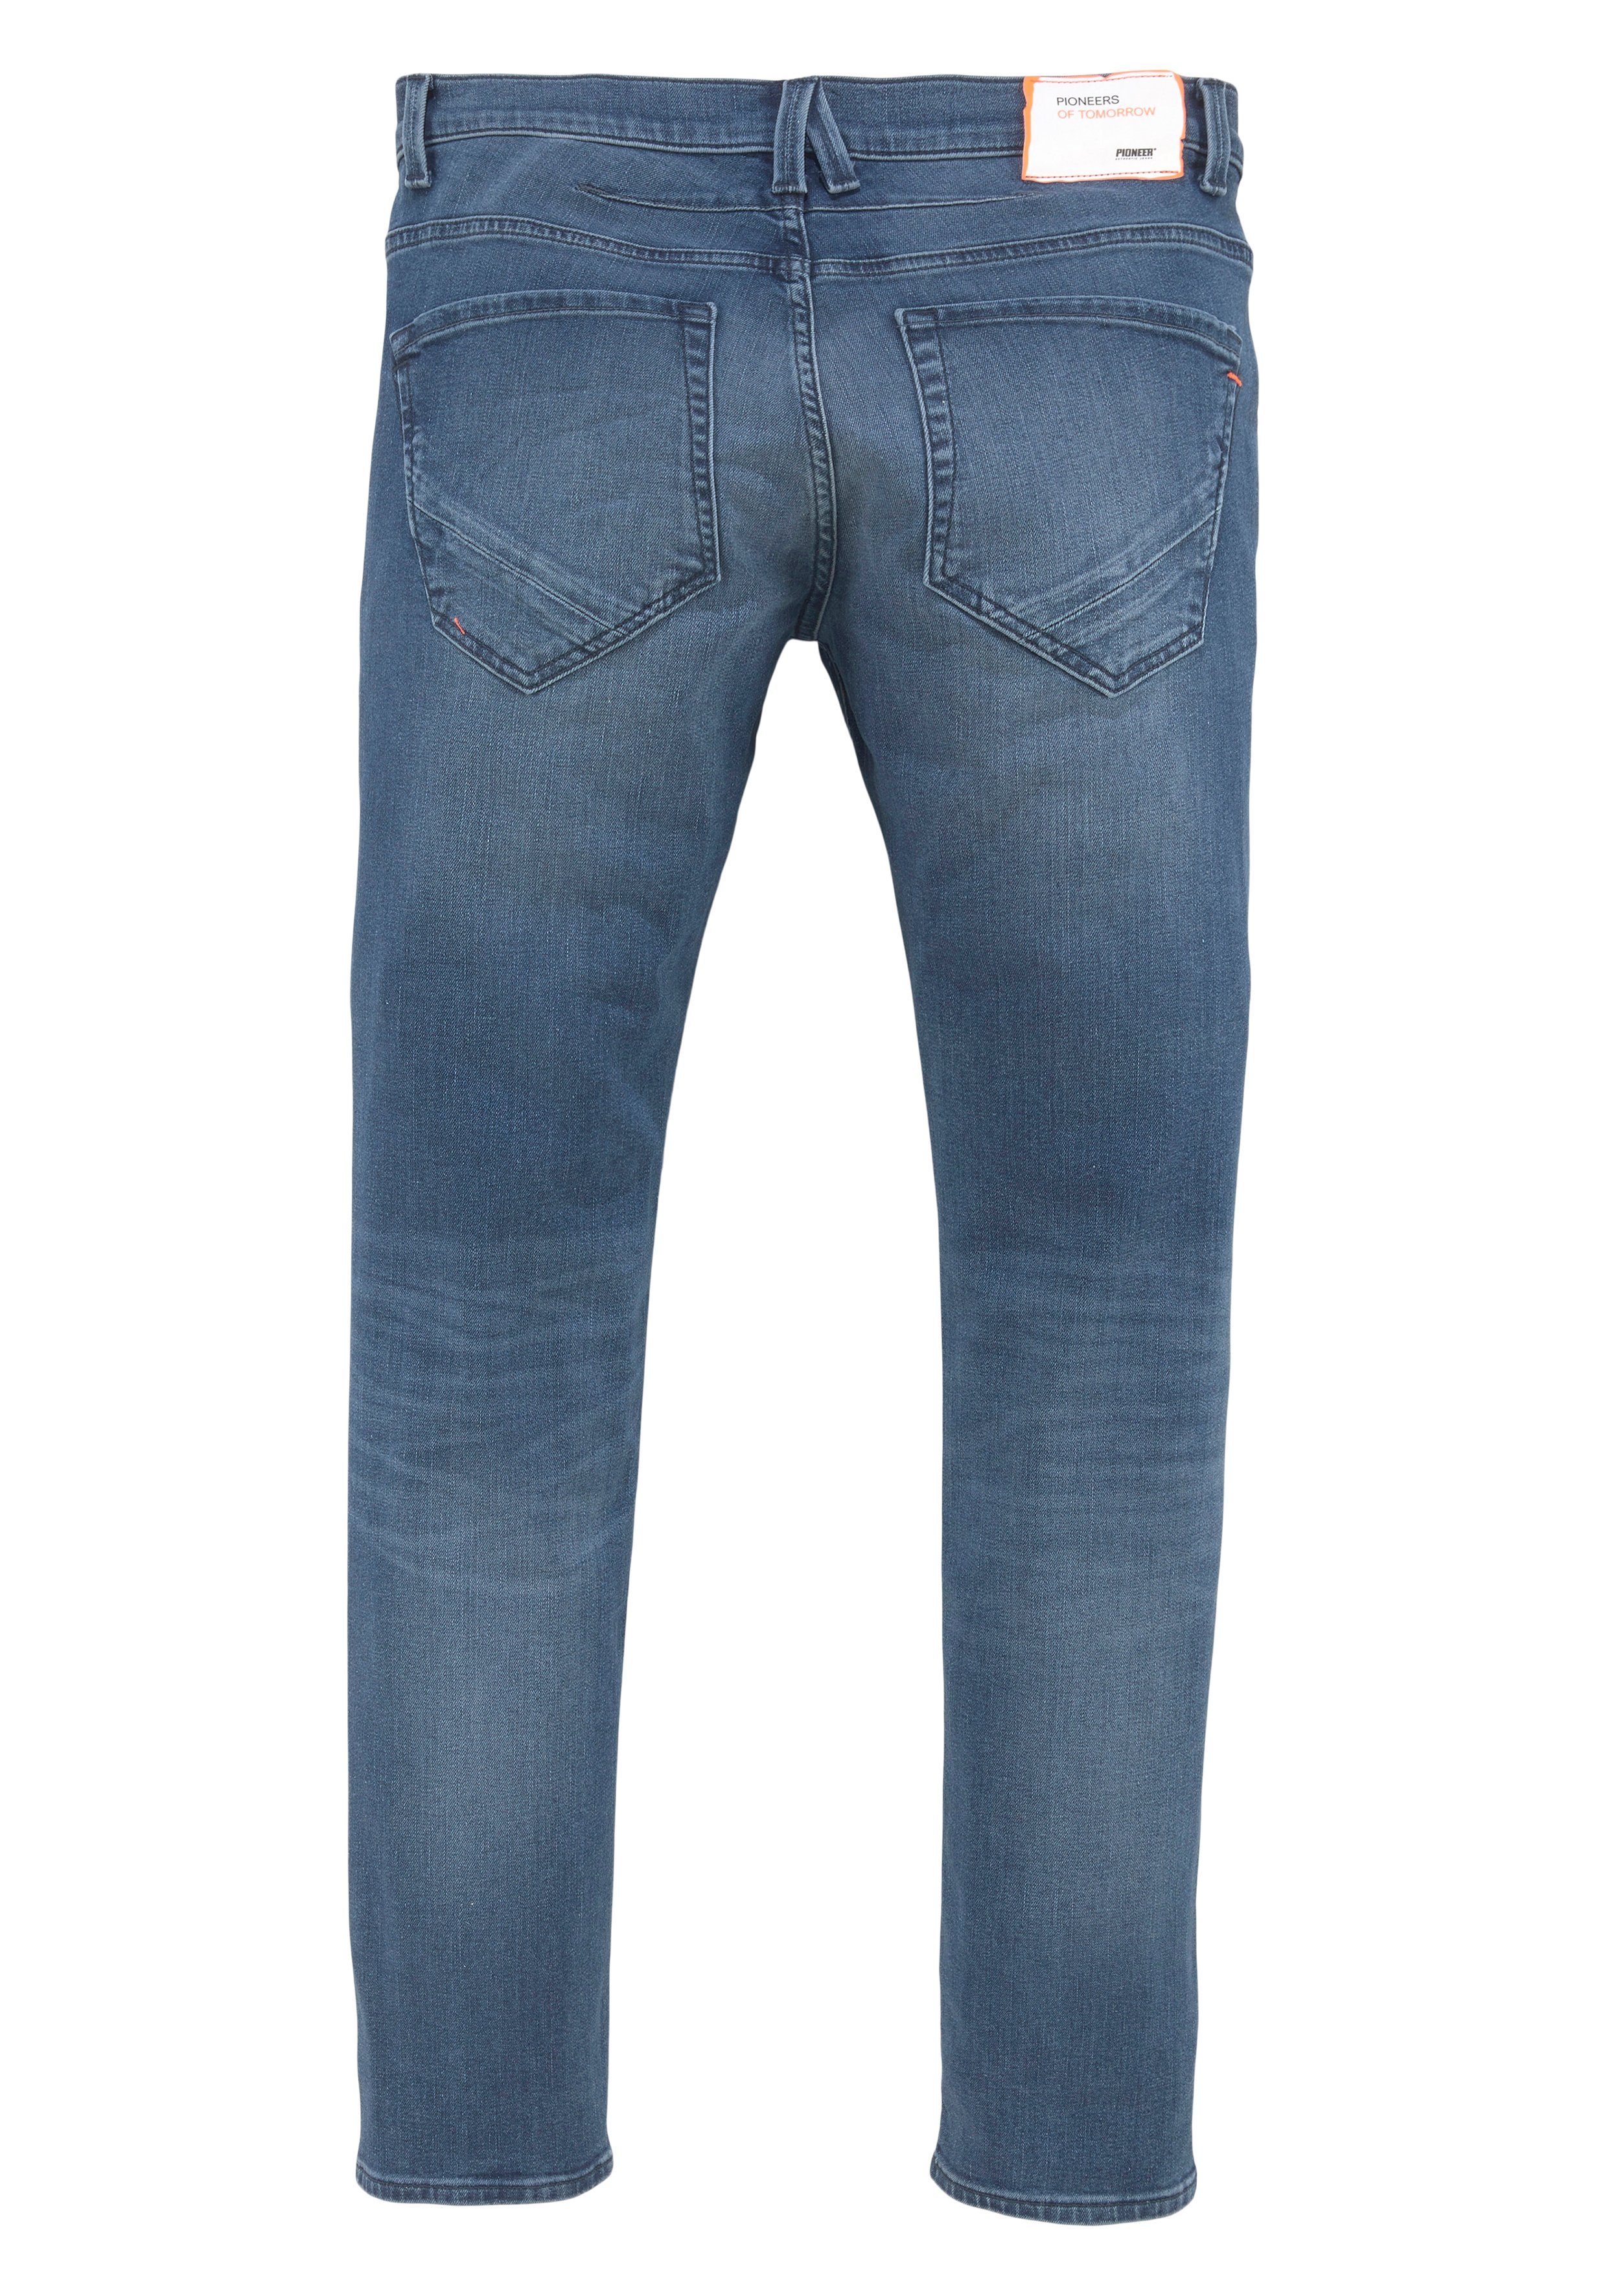 Pioneer Authentic Jeans Slim-fit-Jeans fashion Ethan blue